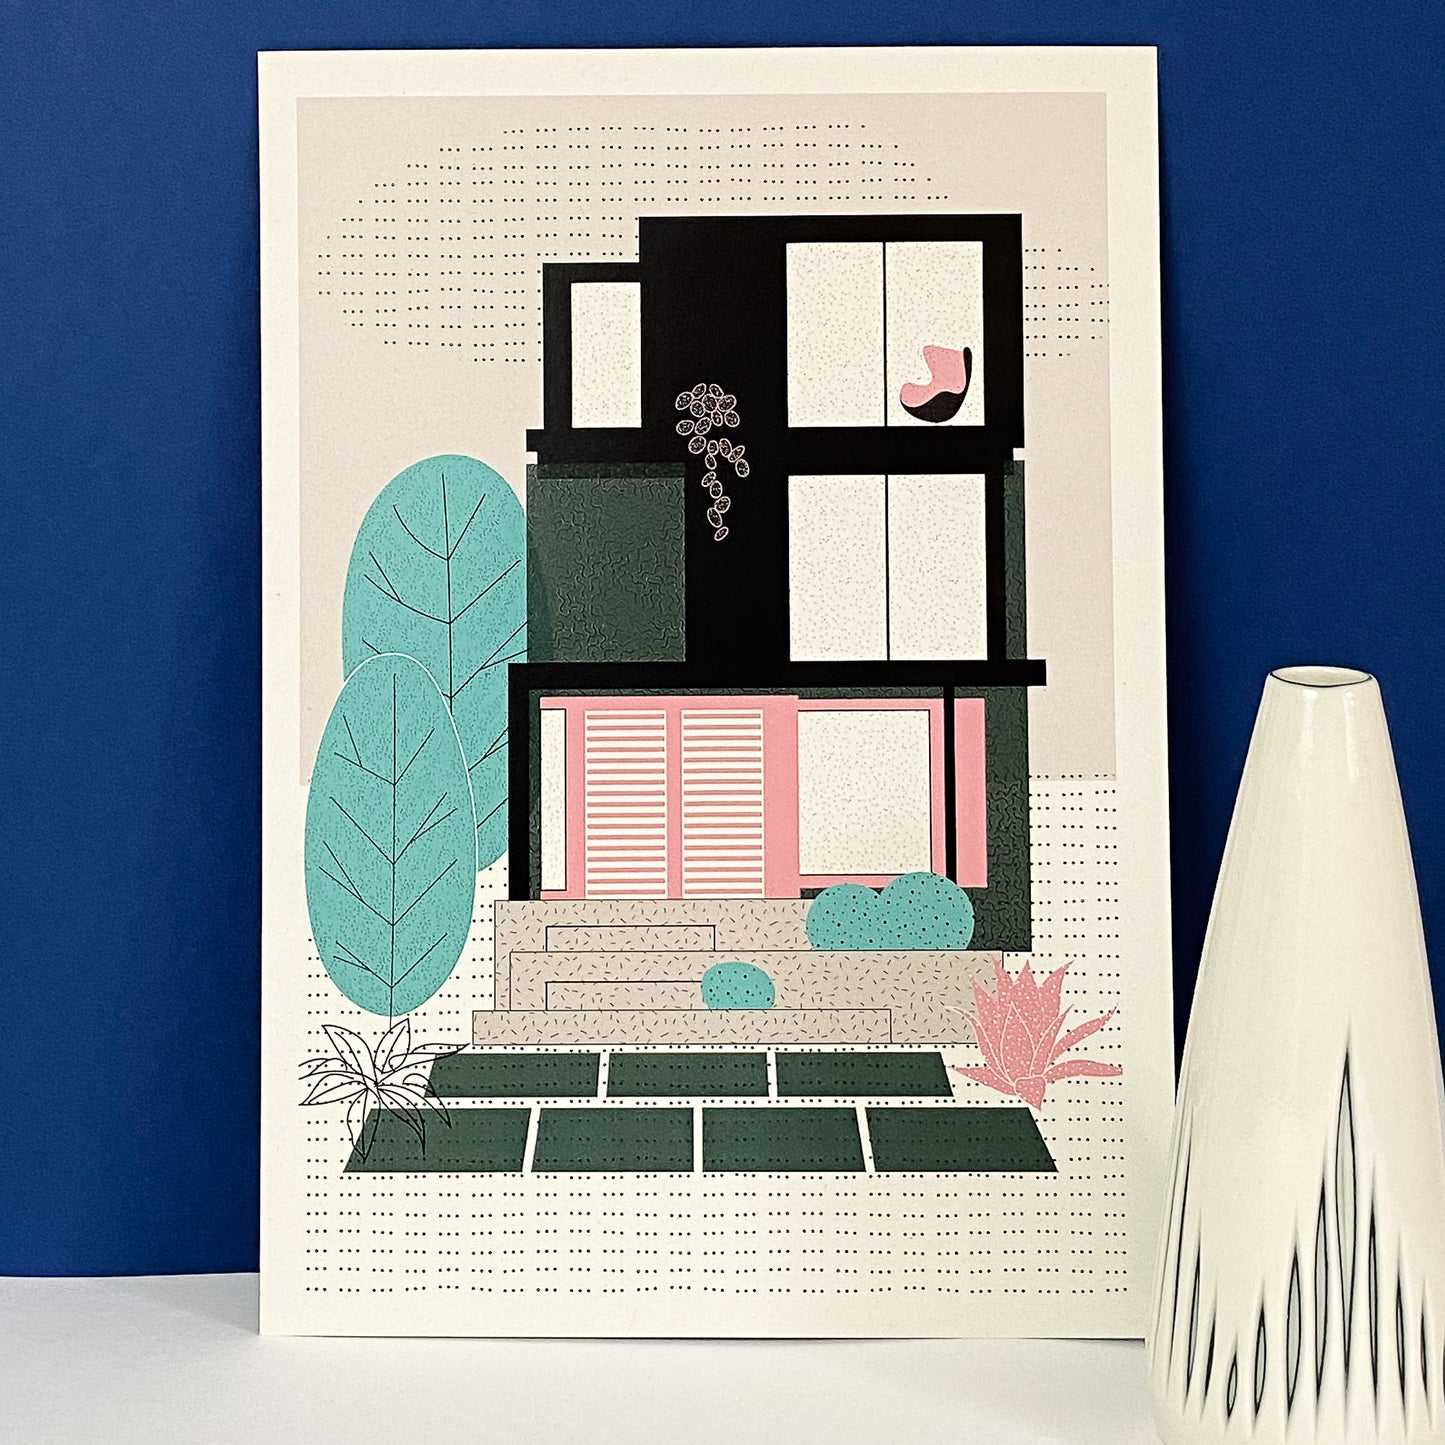 Green Mid Century Townhouse Art Print by The Print Lass. Shown unframed with vase